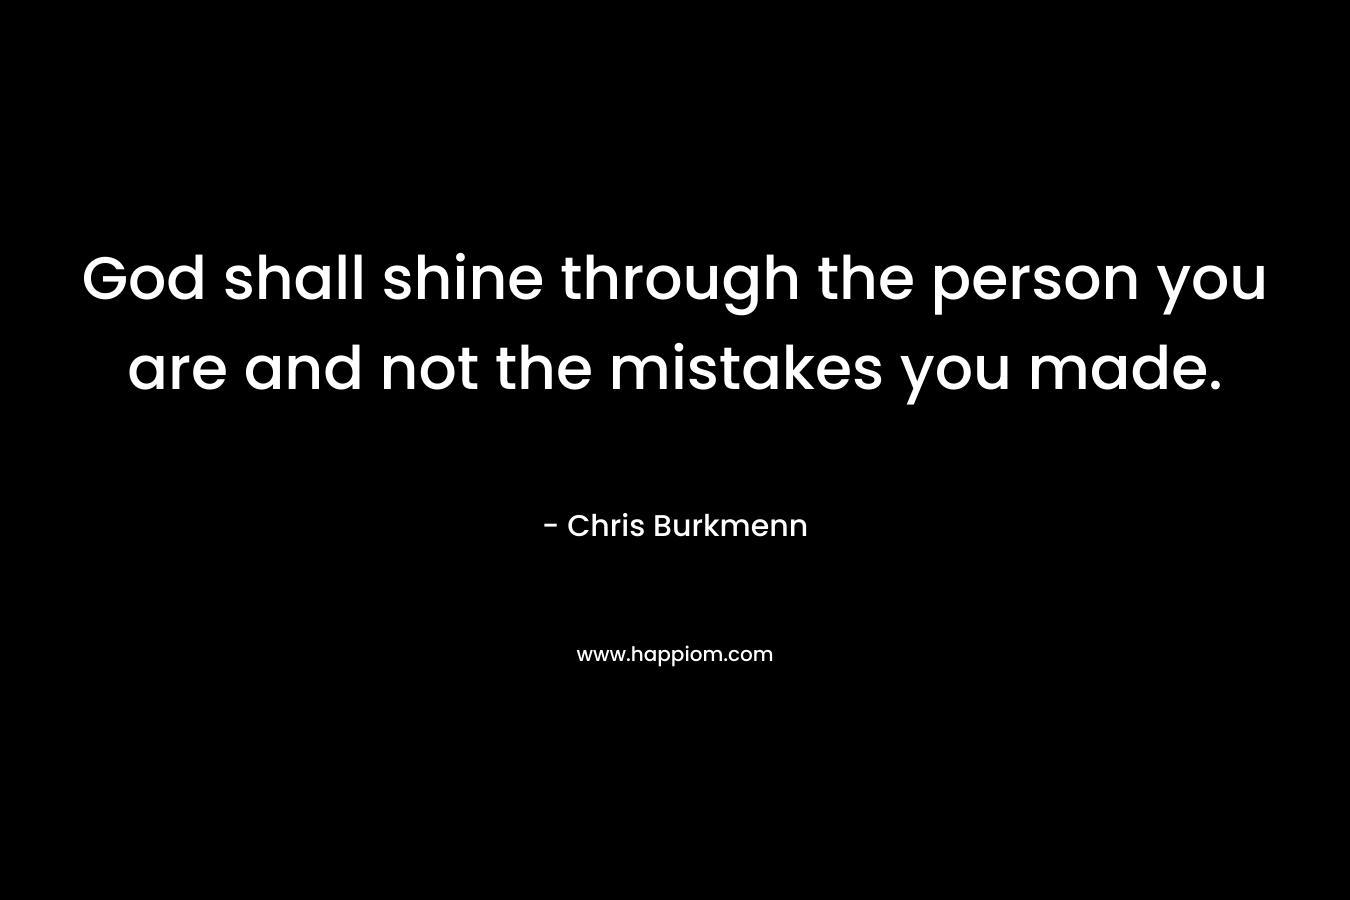 God shall shine through the person you are and not the mistakes you made.